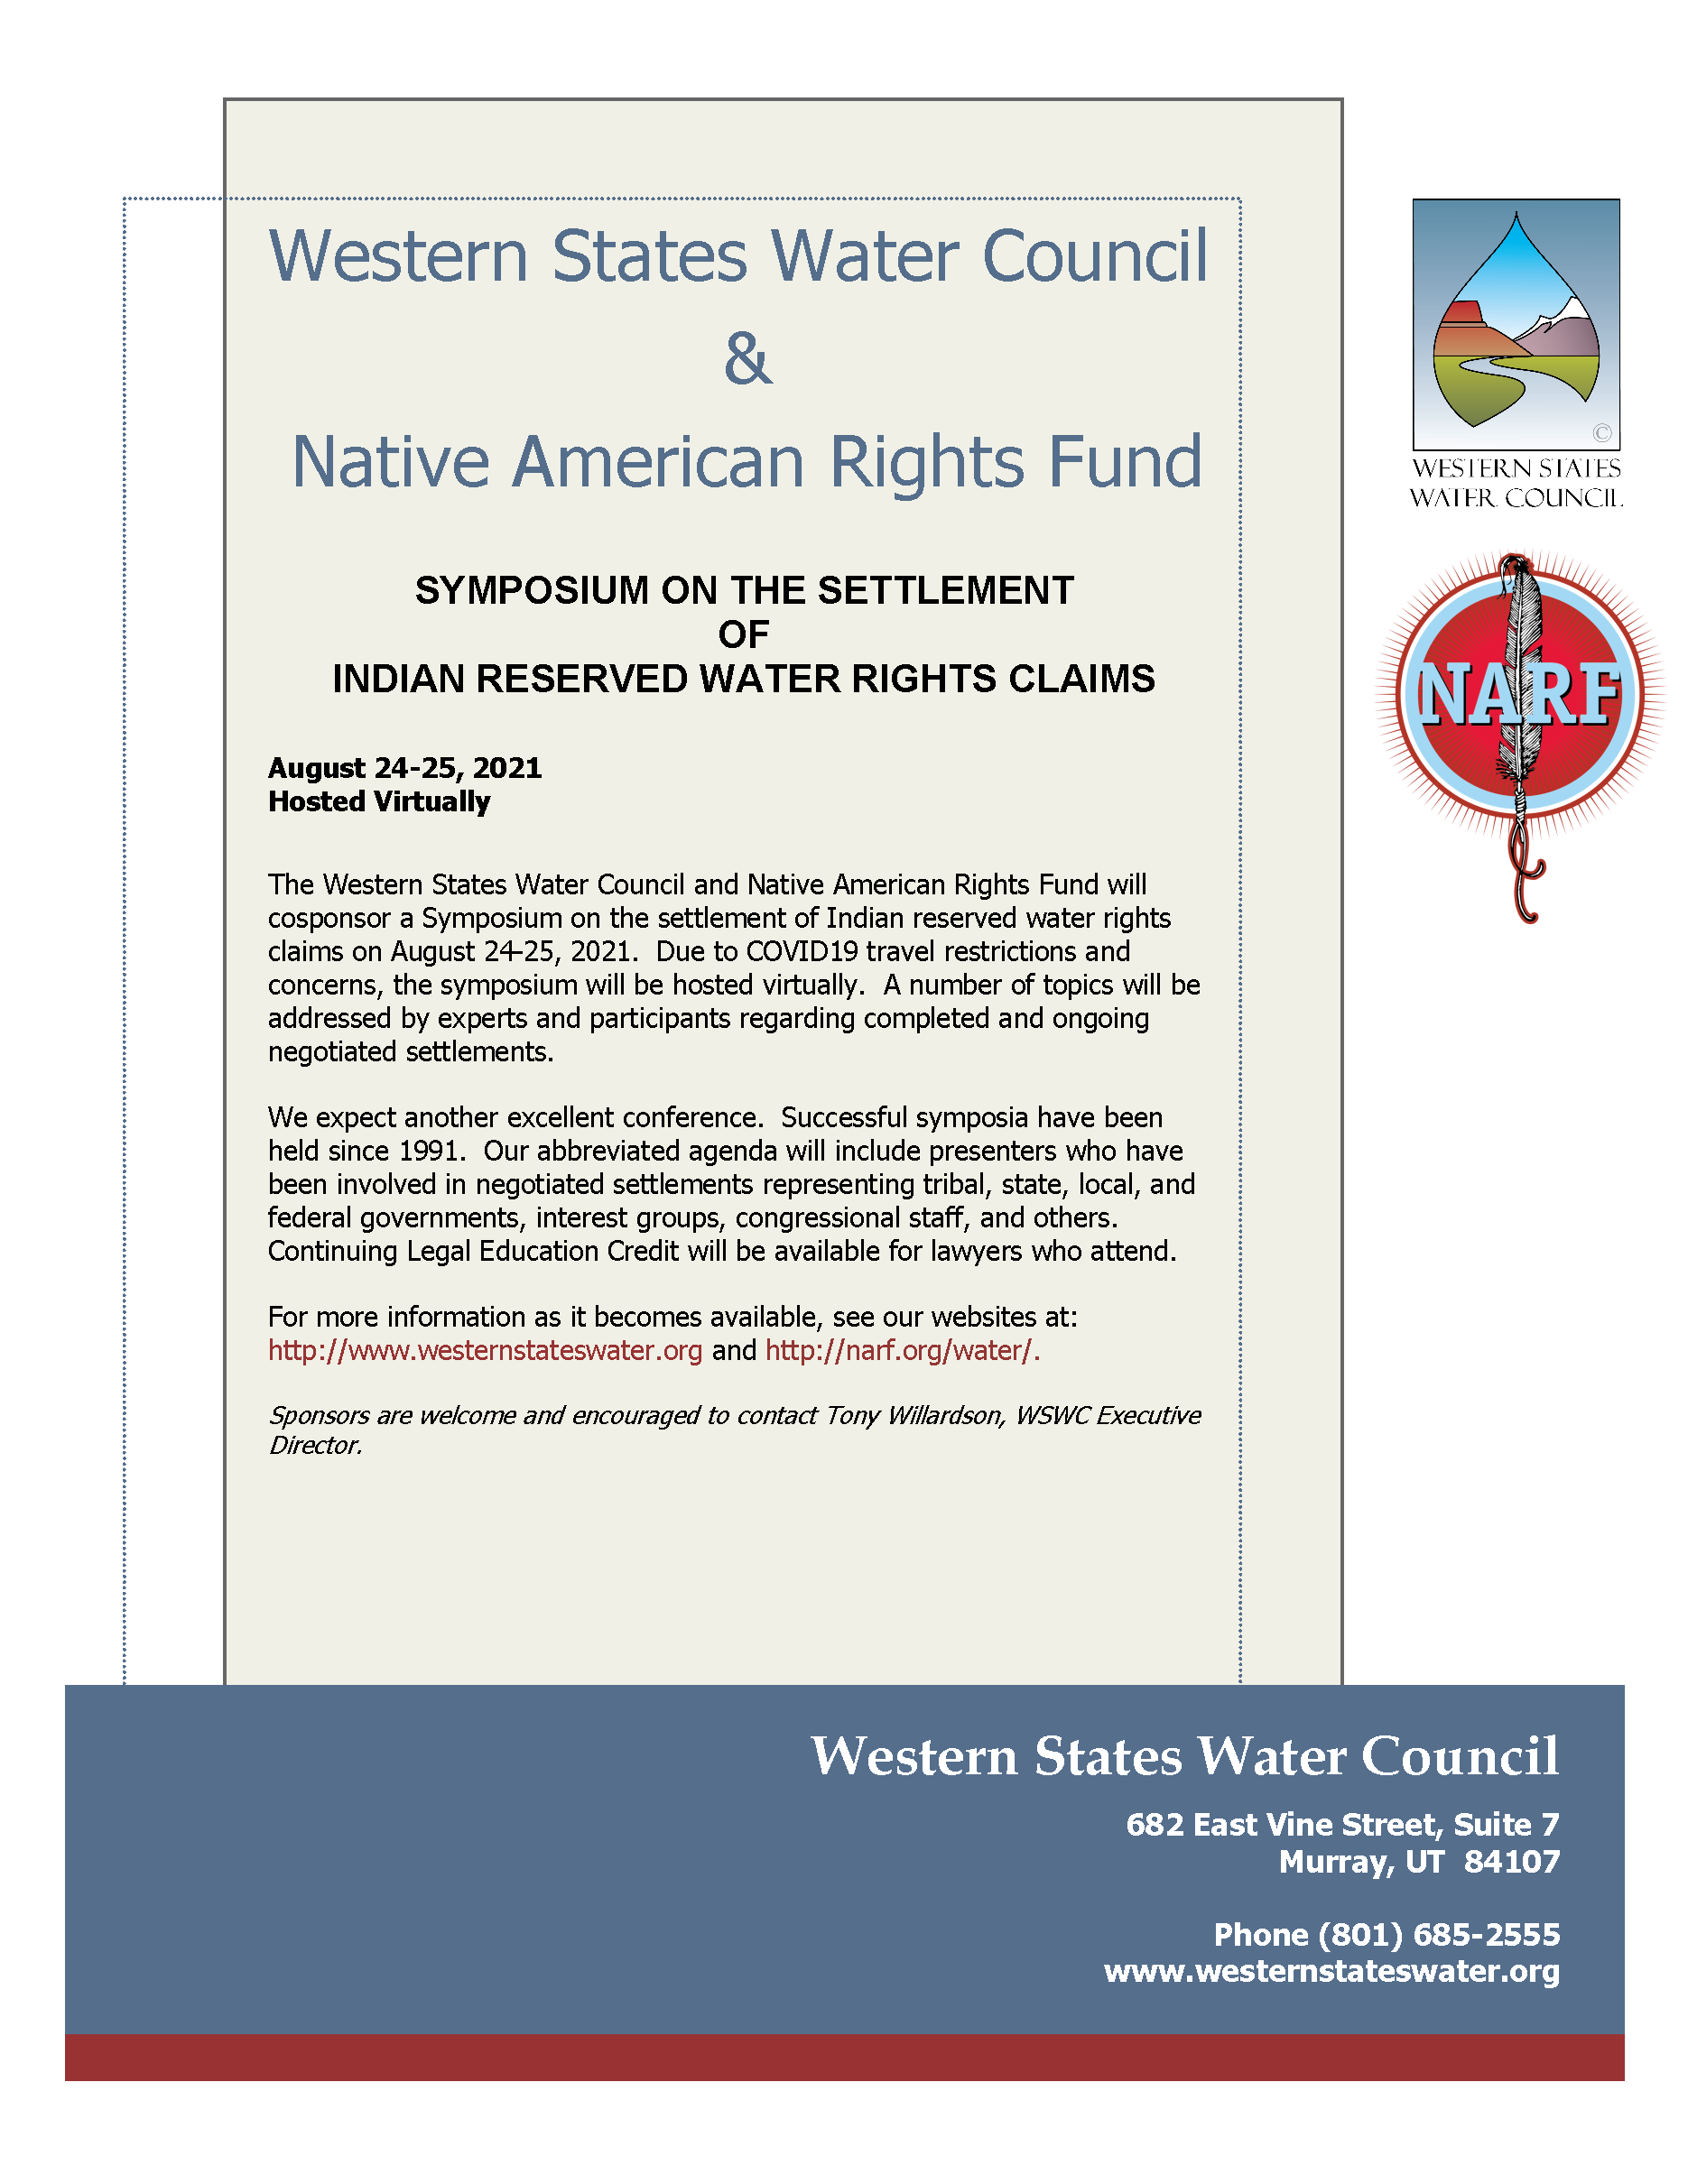 Flyer for the 2021 water symposium